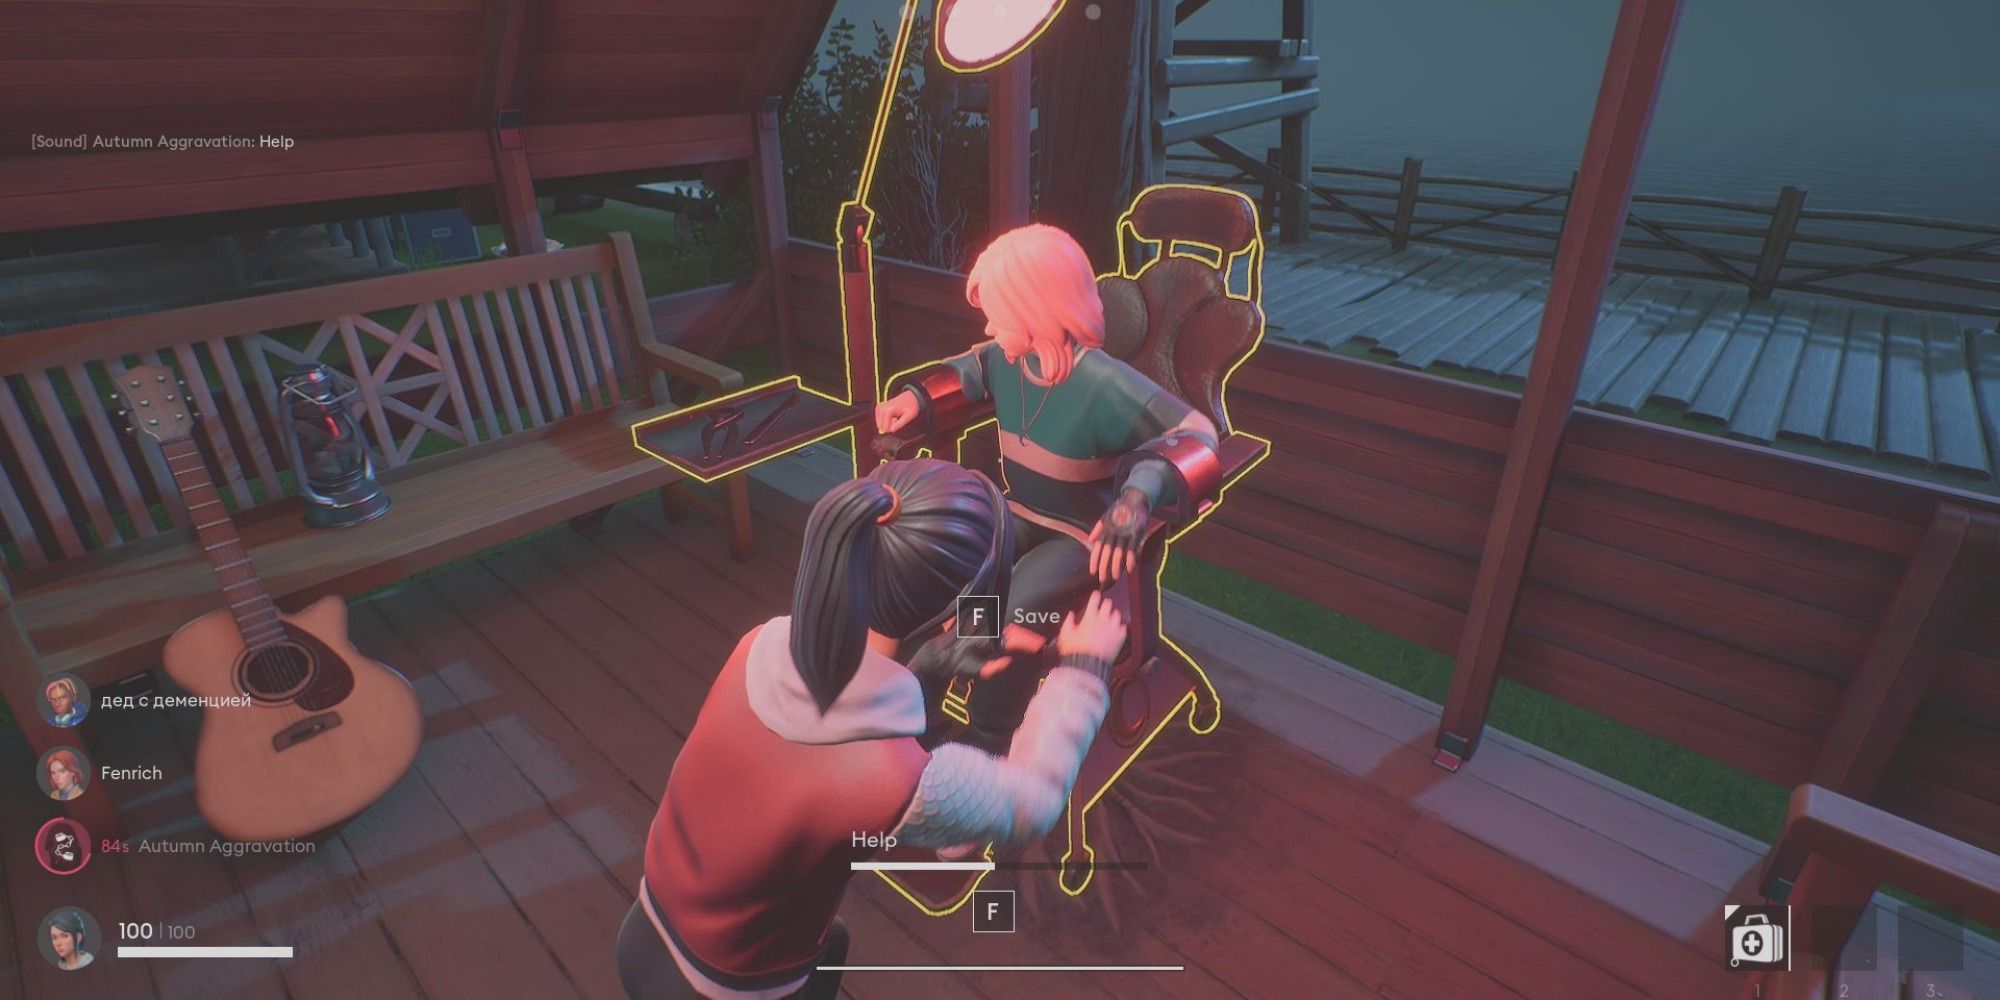 Taiga frees Mable from a Hypnochair inside a pavilion on the Camp map